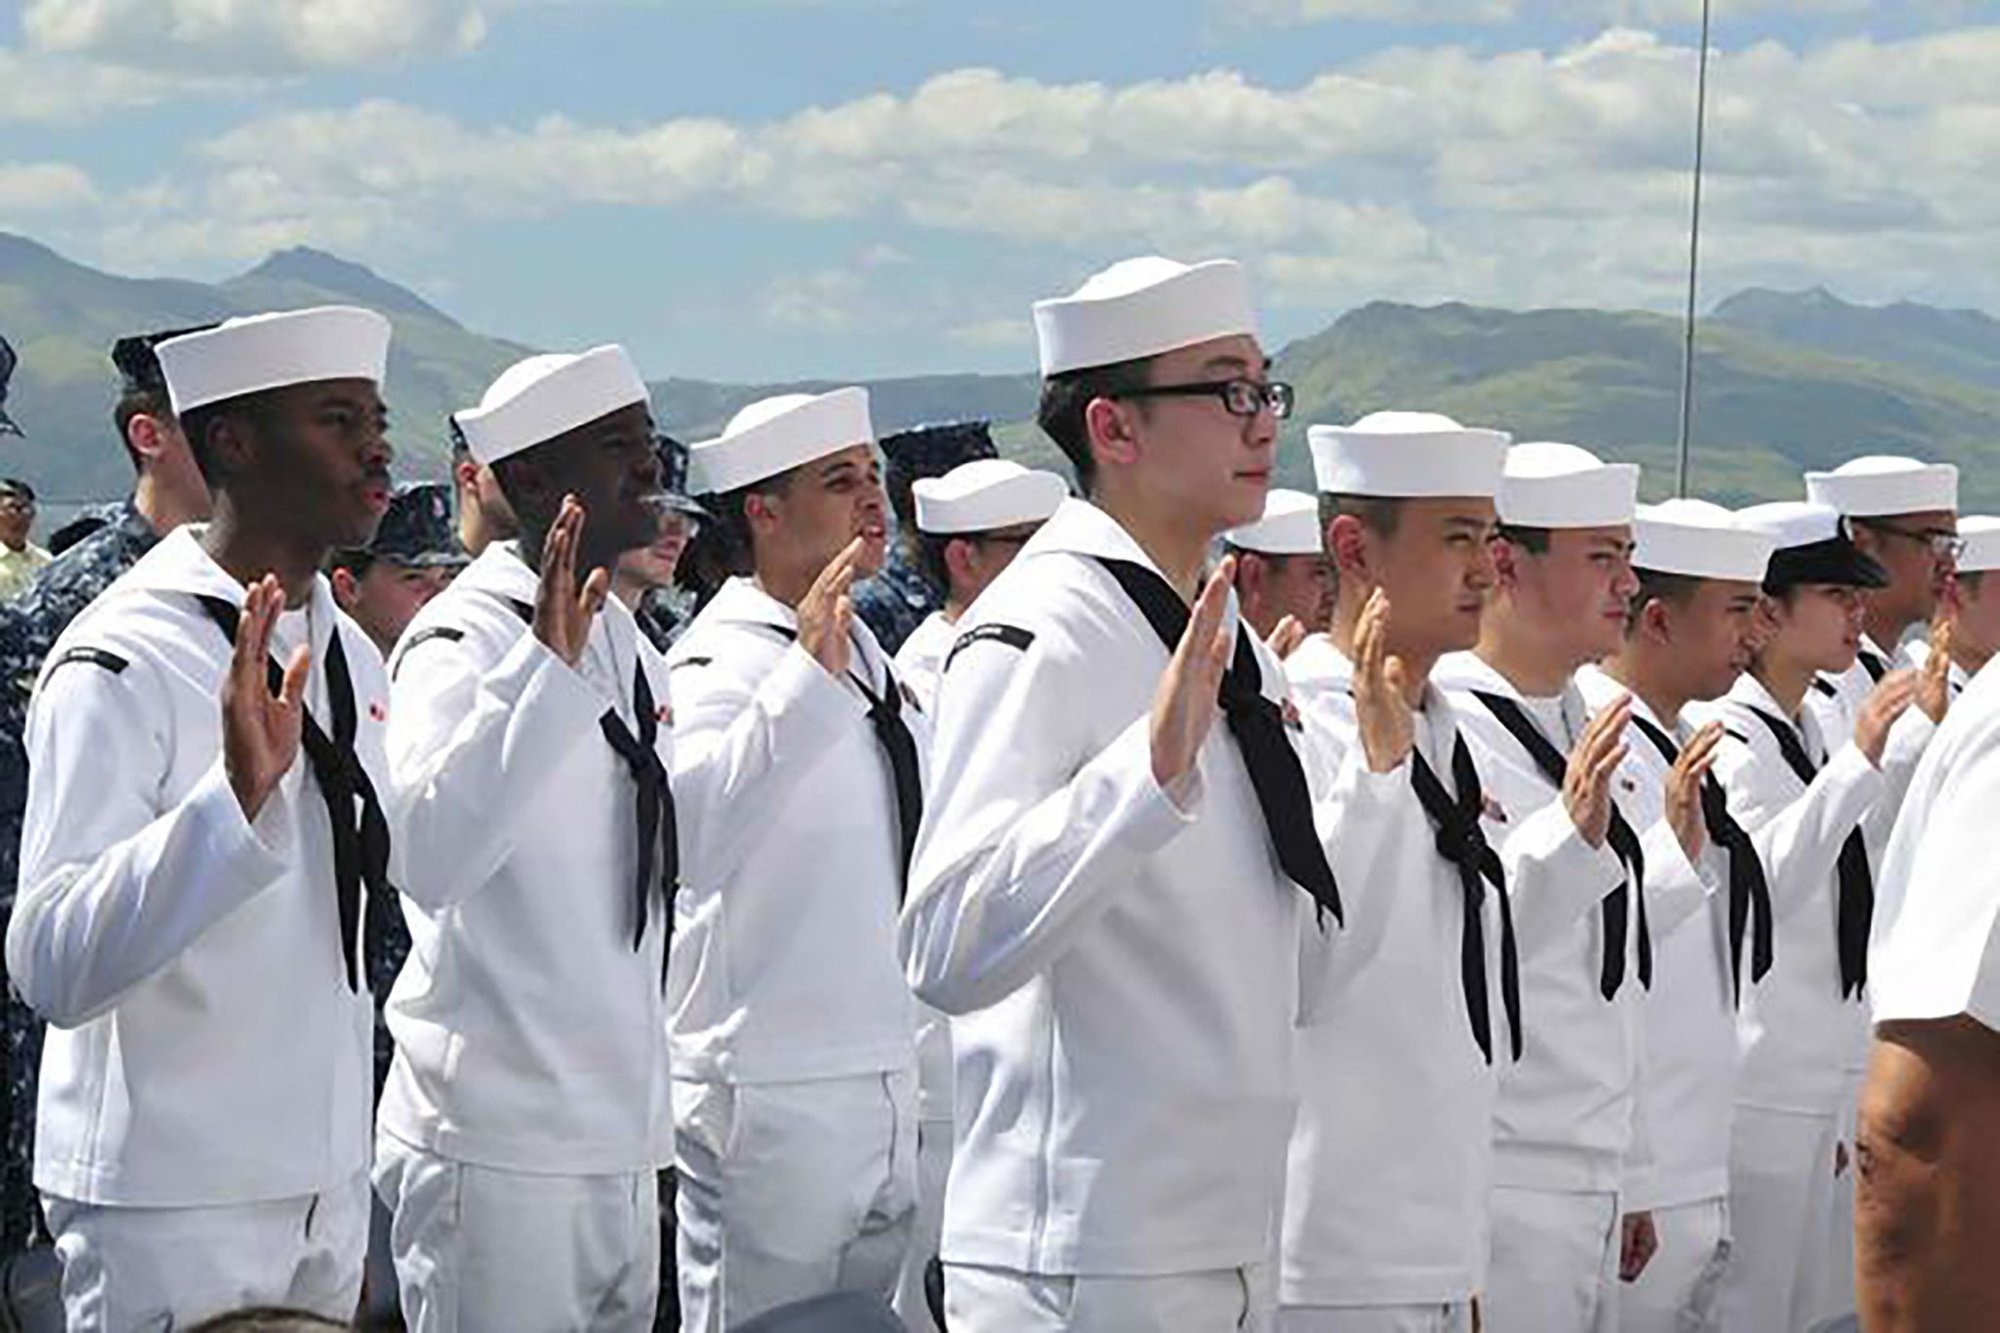 Sailors take the oath of allegiance during a naturalization ceremony aboard the forward-deployed amphibious assault ship USS Essex. Photo by Mass Communication Specialist 1st Class Terry Matlock.